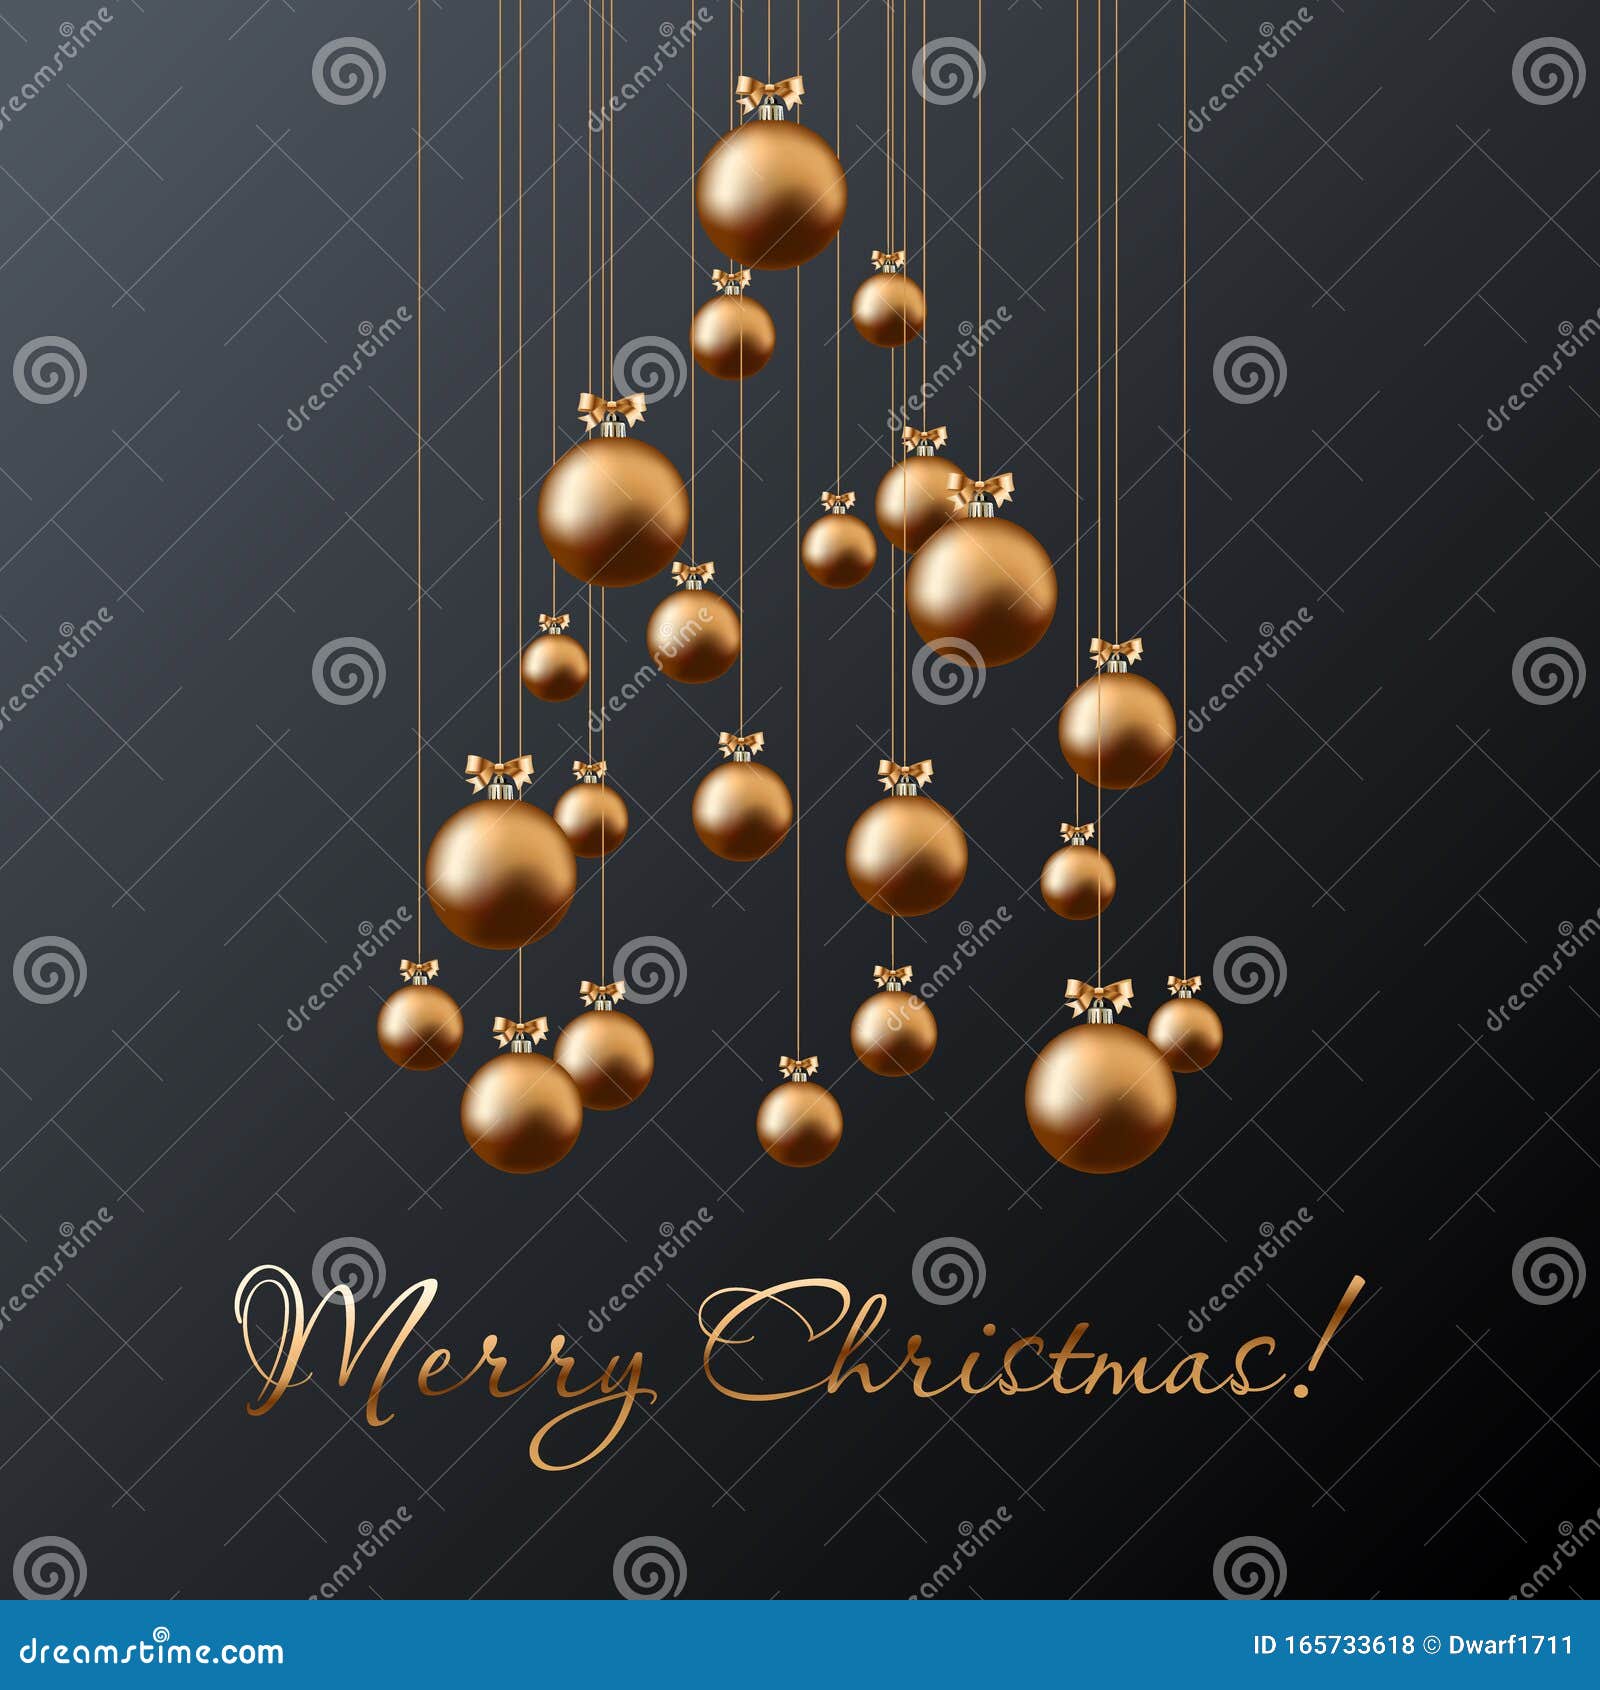 Christmas tree from gold balls and Merry Christmas golden handwritten calligraphic lettering on black background. Square social media post or banner vector template.